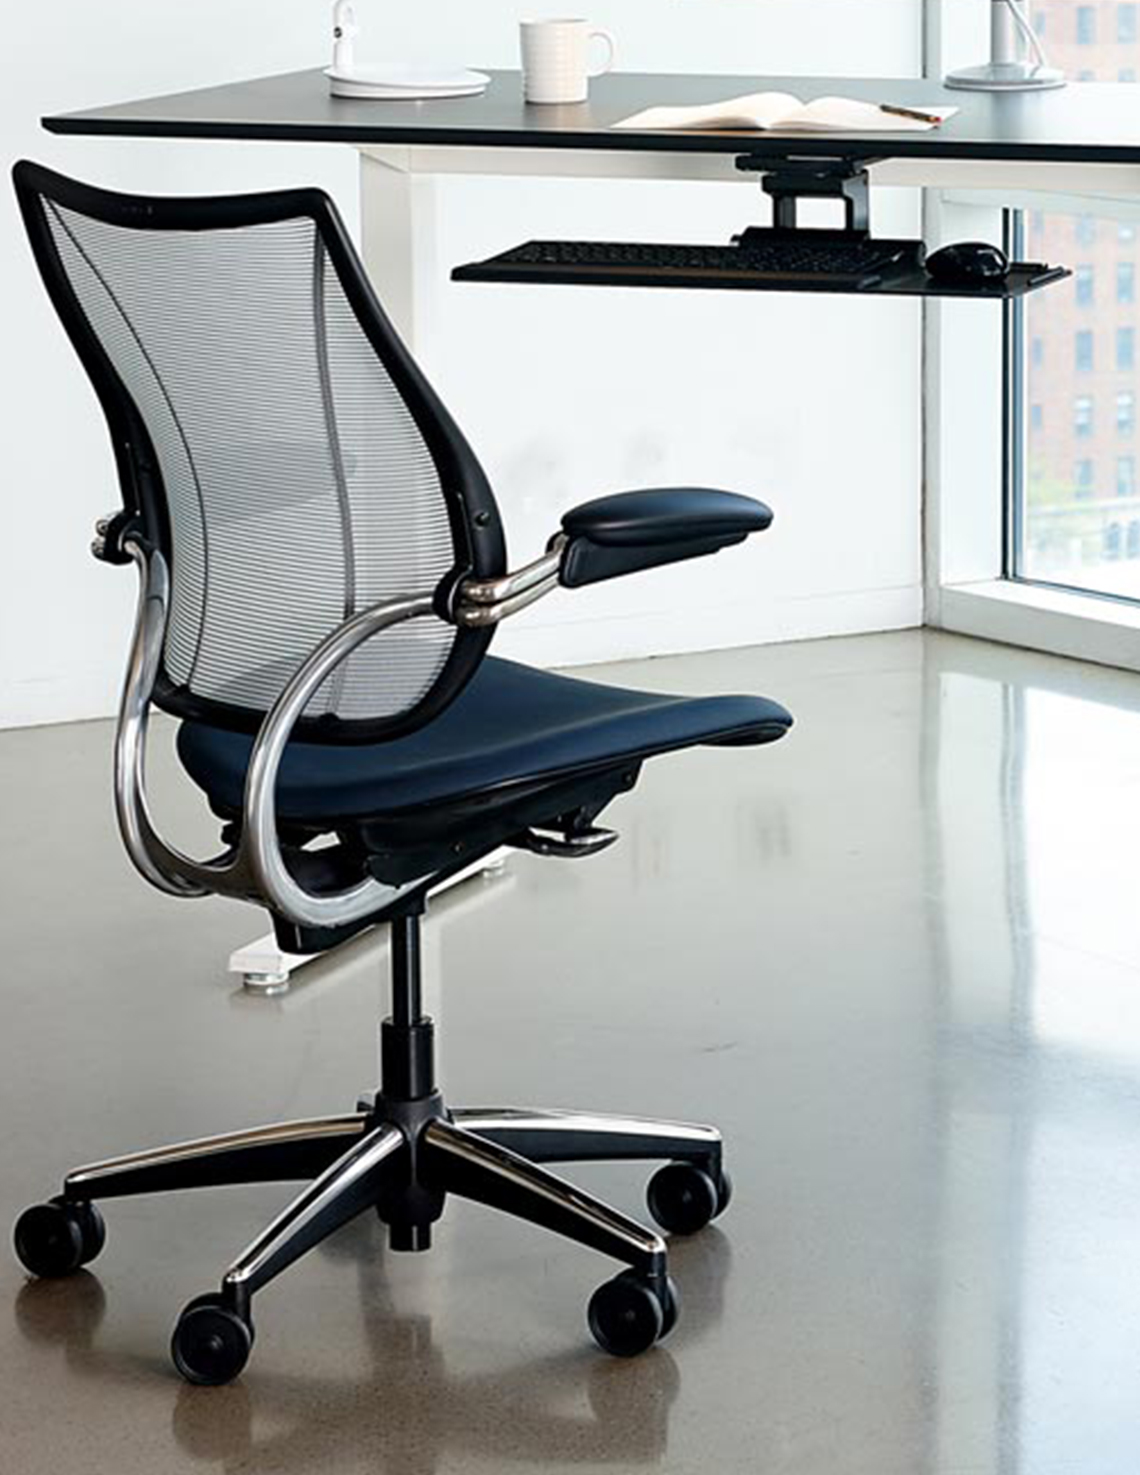 This mesh task chair provides lumbar support and comfort for every person who sits in it.